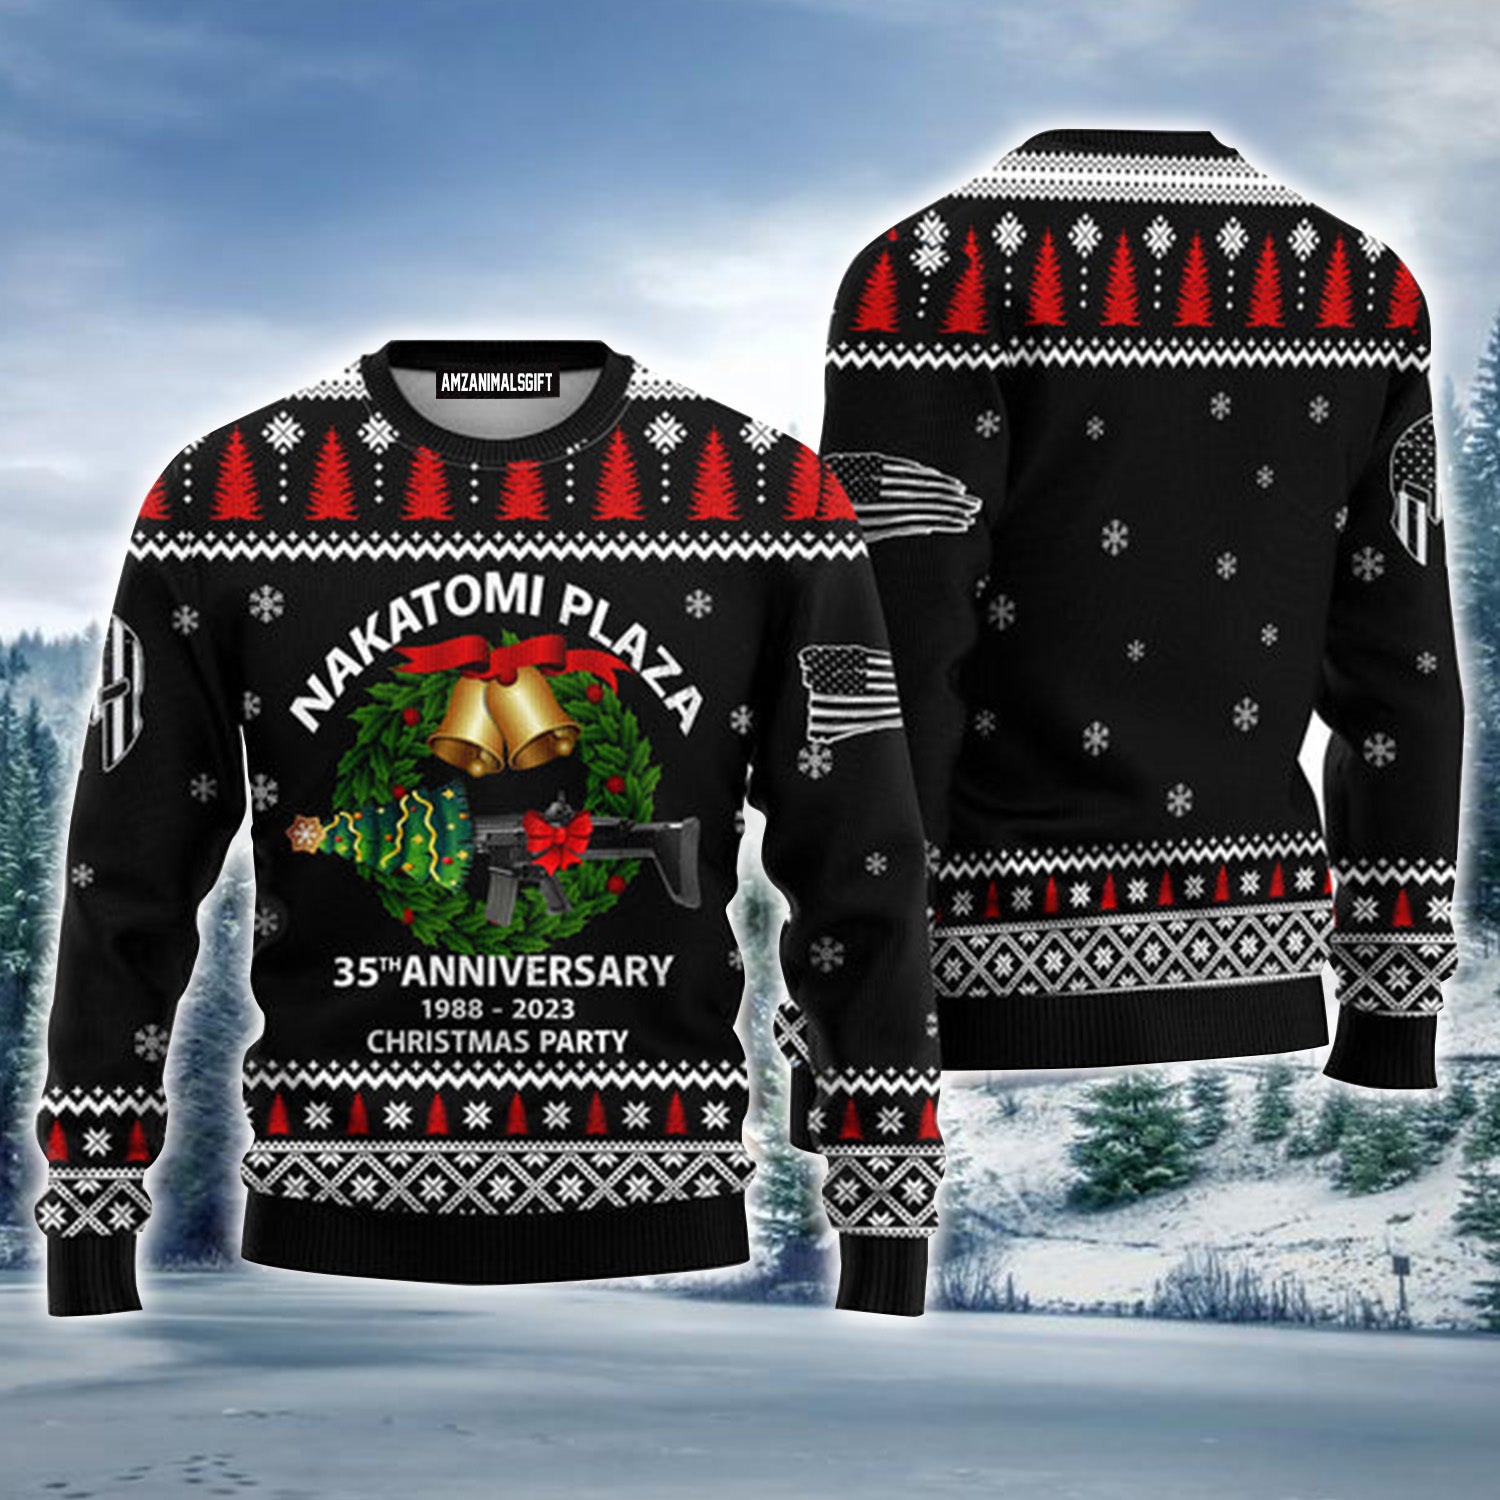 35th Anniversary 2023 Nakatomi Plaza Urly Christmas Sweater, Christmas Party 1988 For Men & Women - Perfect Gift For Christmas, Family, Friends